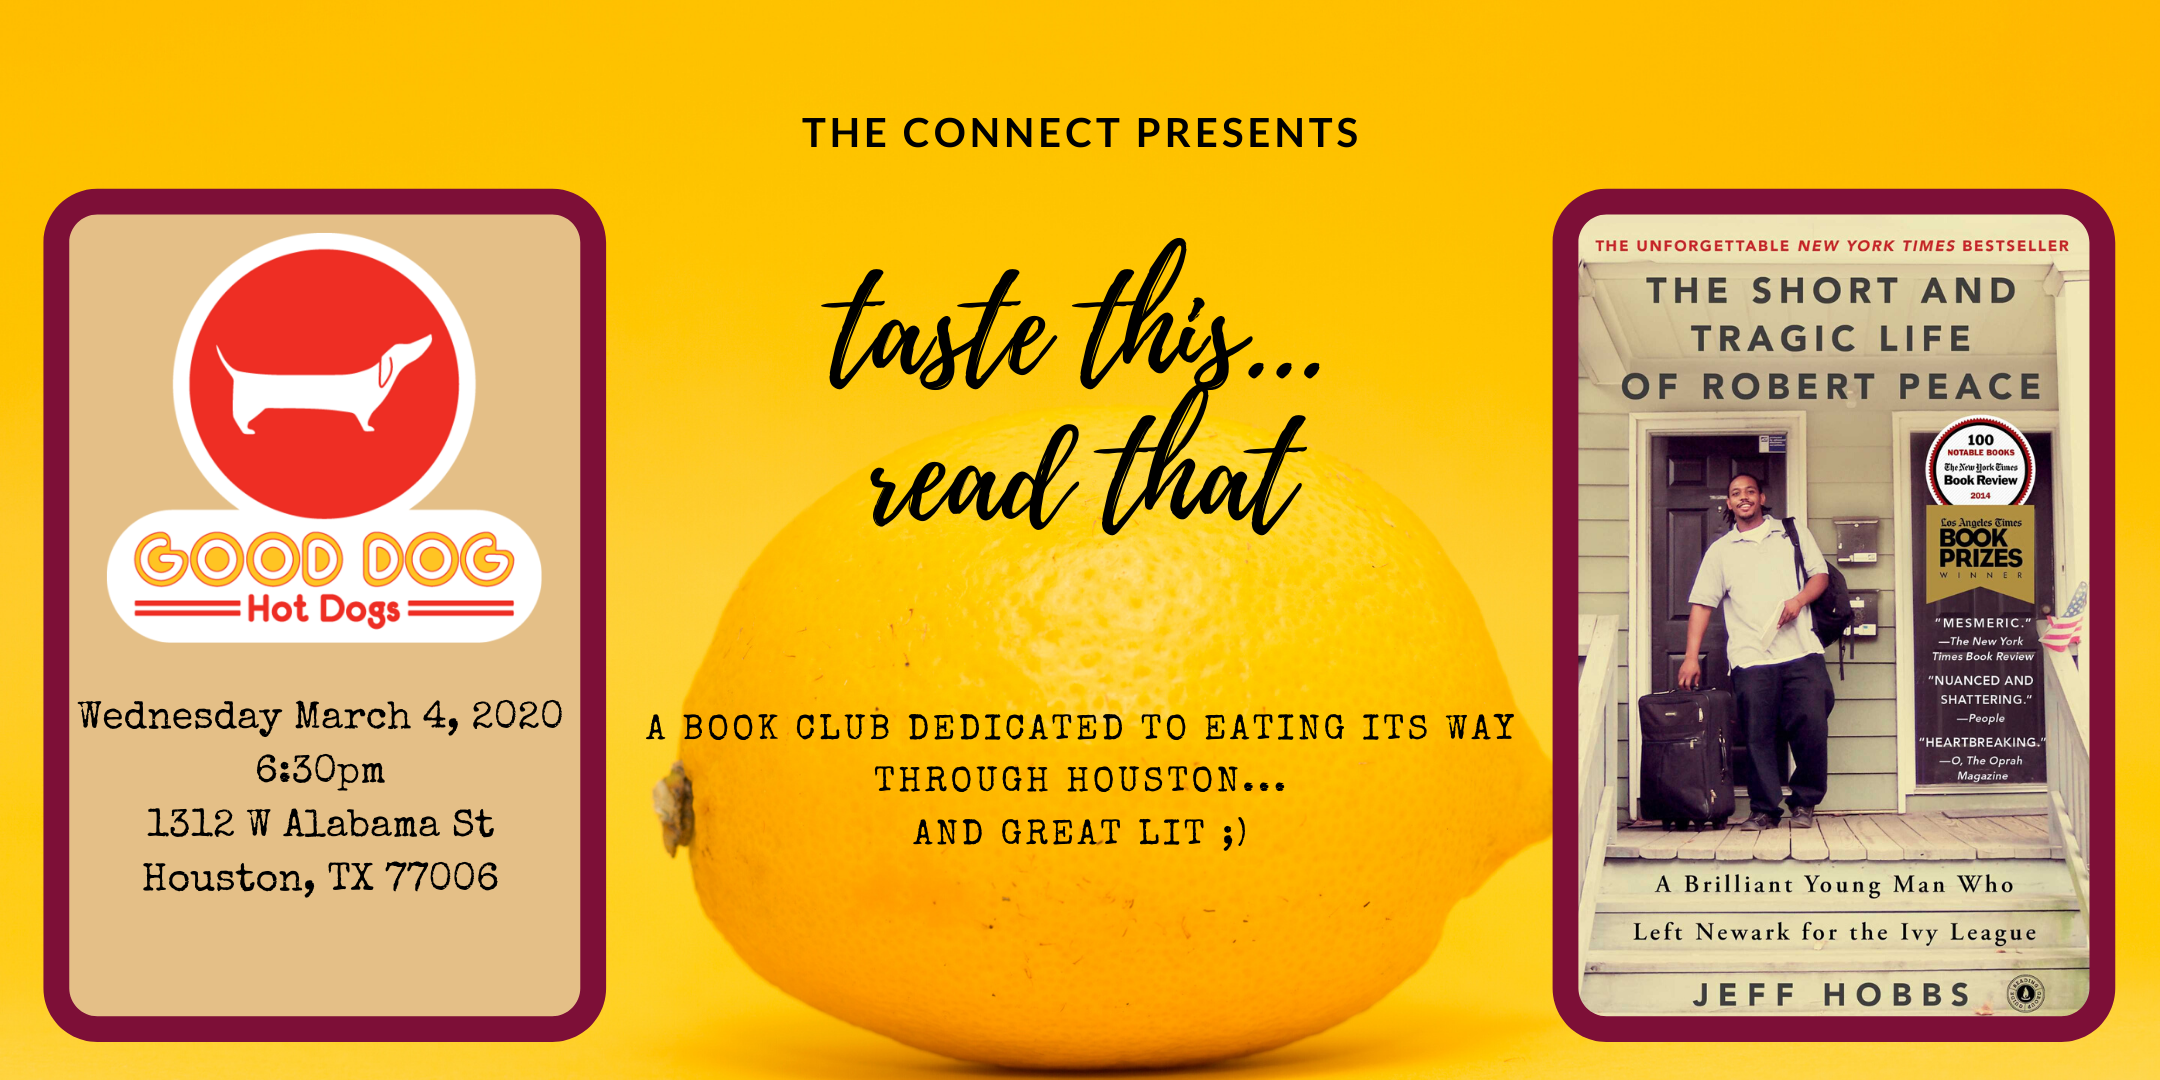 The Connect Presents: Taste This... Read That